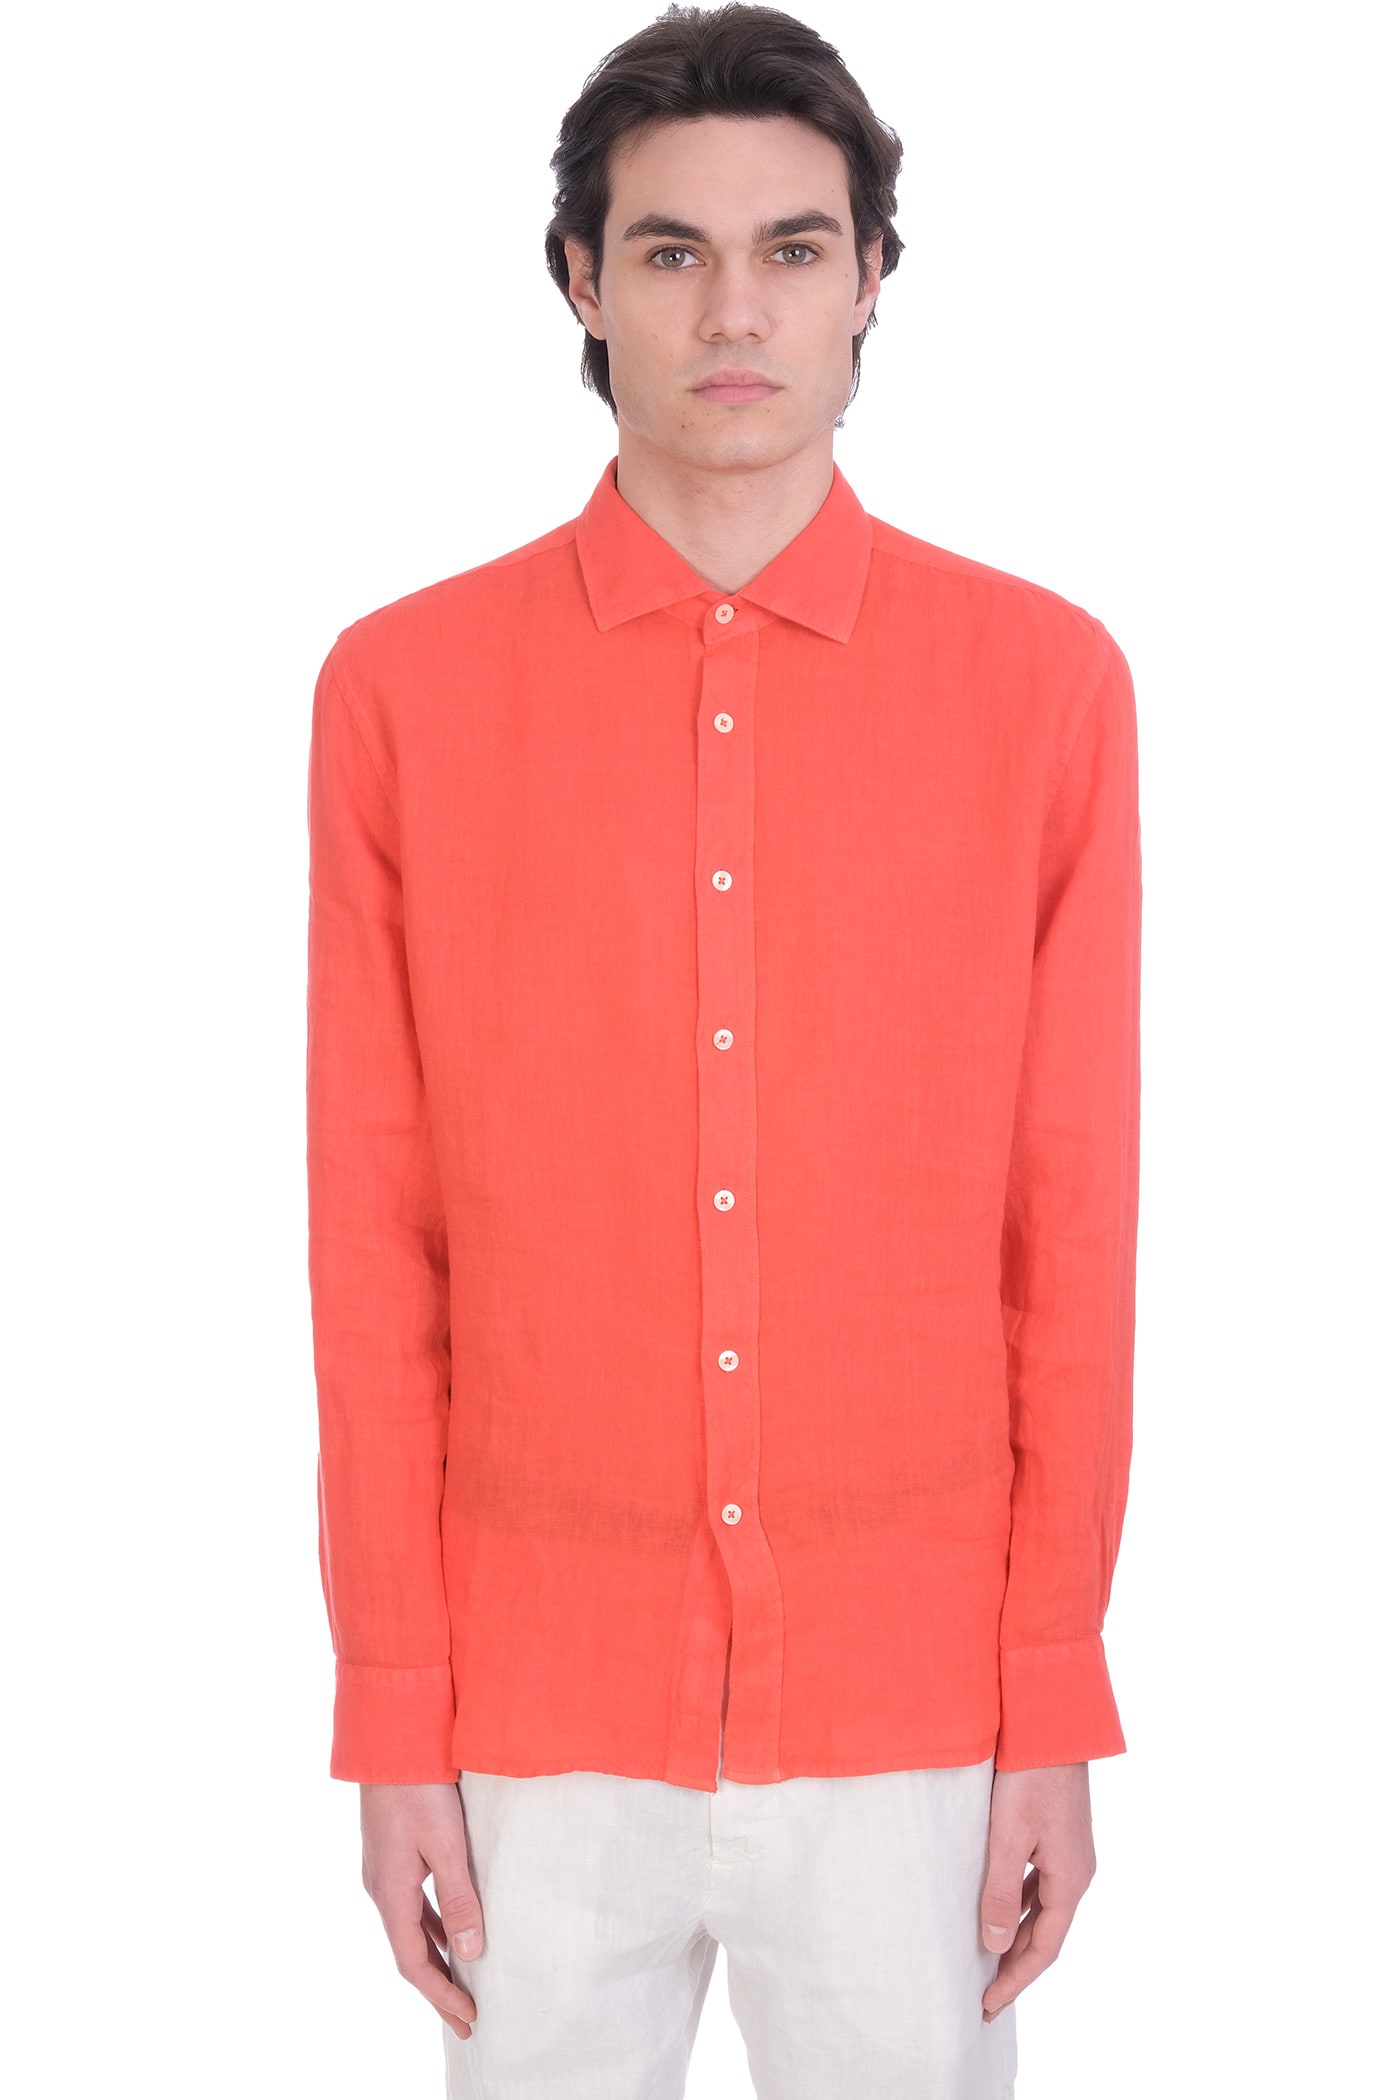 120% Lino Shirt In Red Linen